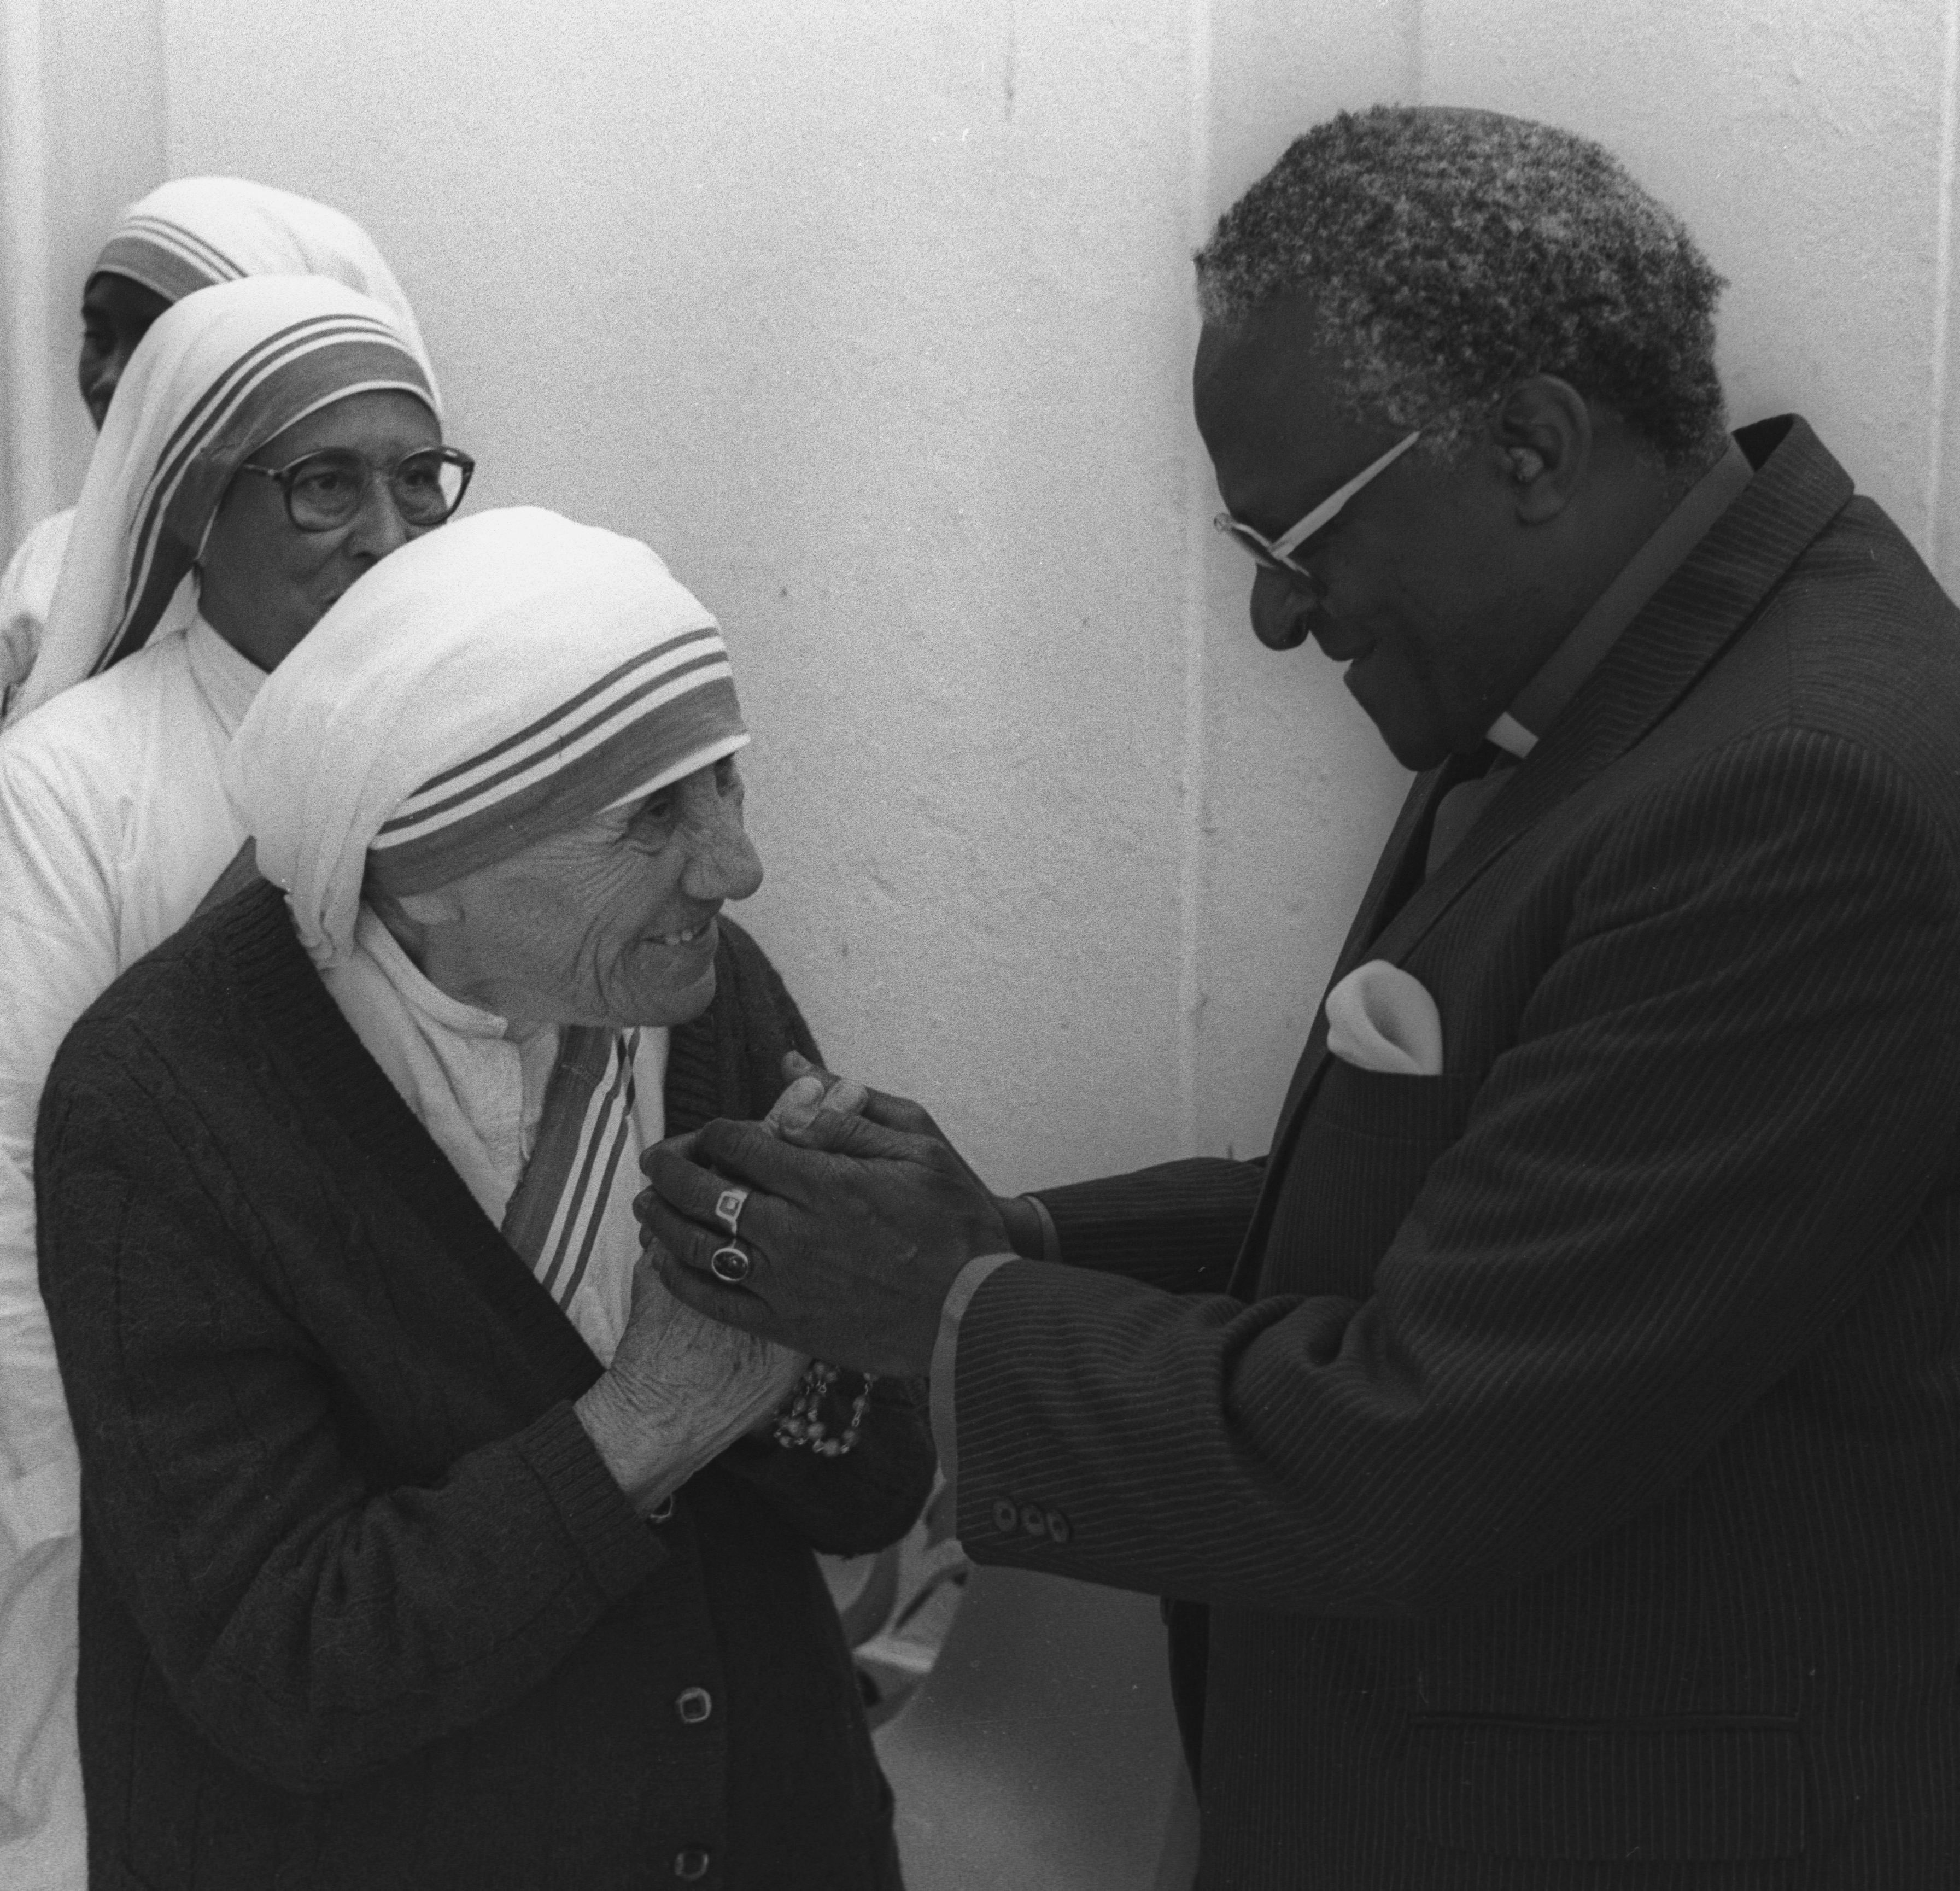 Nobel Peace Price winners Mother Teresa of Calcutta and Archbishop Desmond Tutu meet prior to a lunch in Cape Town